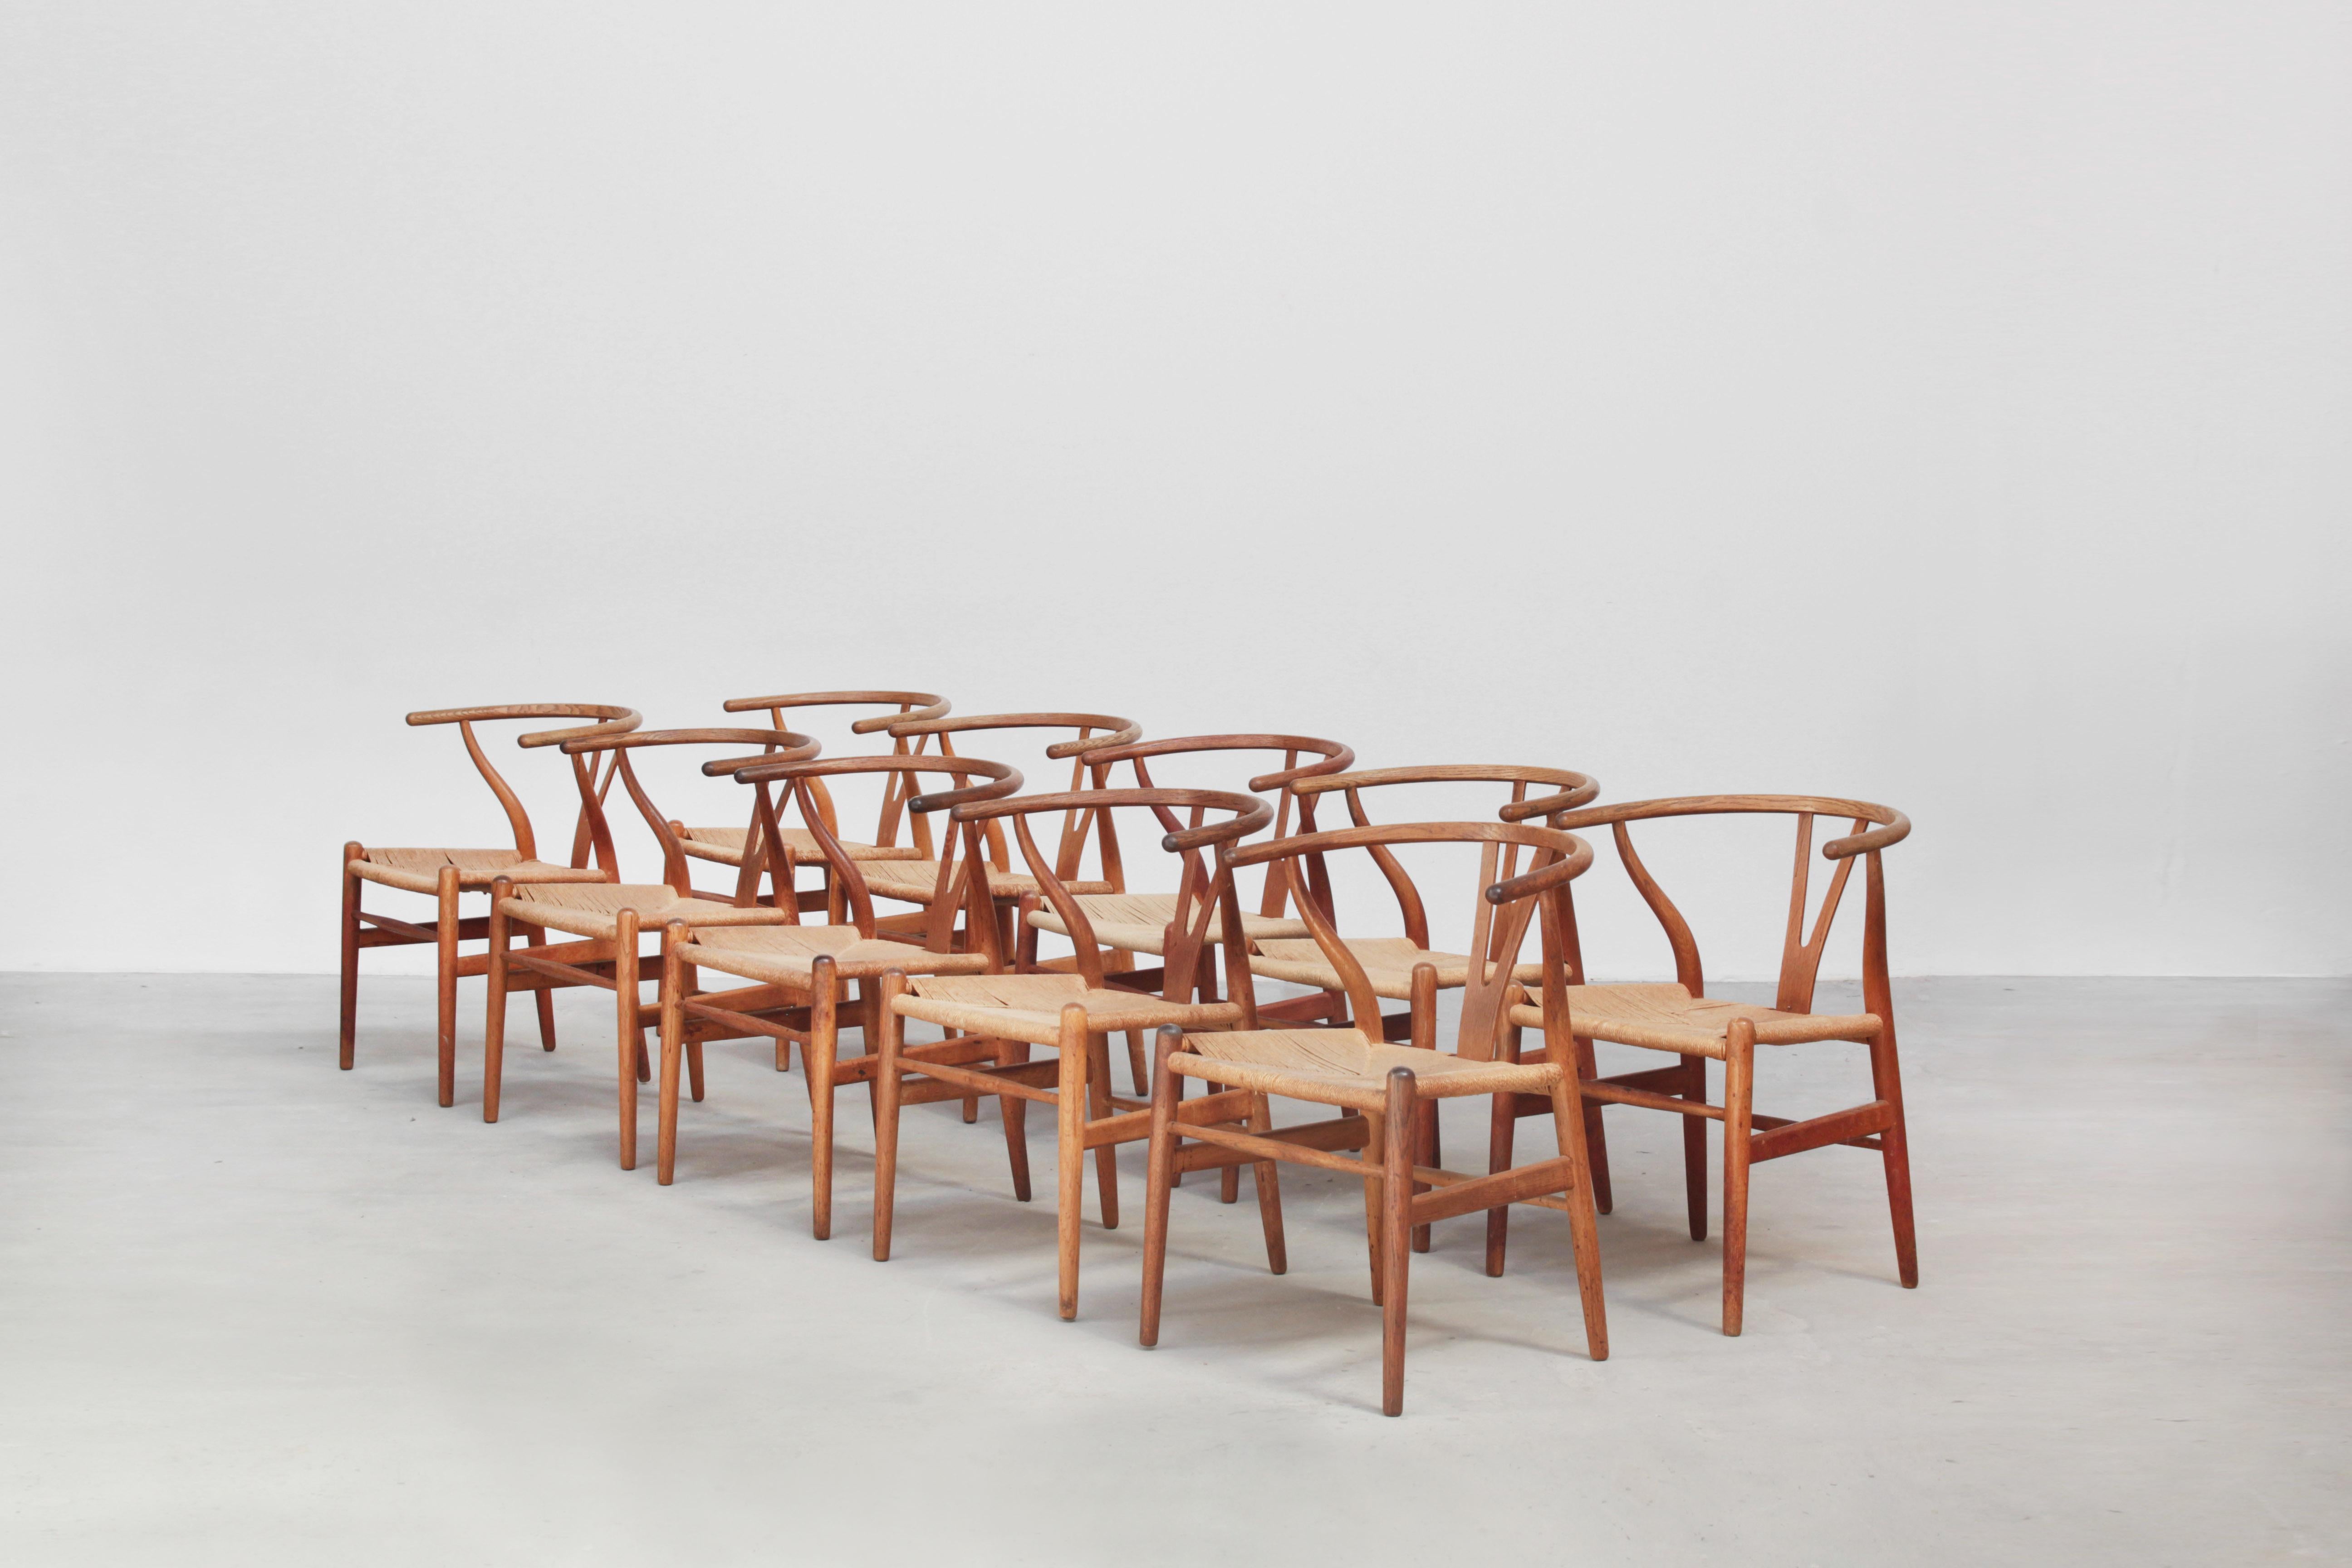 A set of ten beautiful and original wishbone chairs designed by Hans J. Wegner and produced by Carl Hansen in the 1960s in Denmark. All chairs are made out of oak and in a beautiful original condition with signs of usage like little stains, dirt,